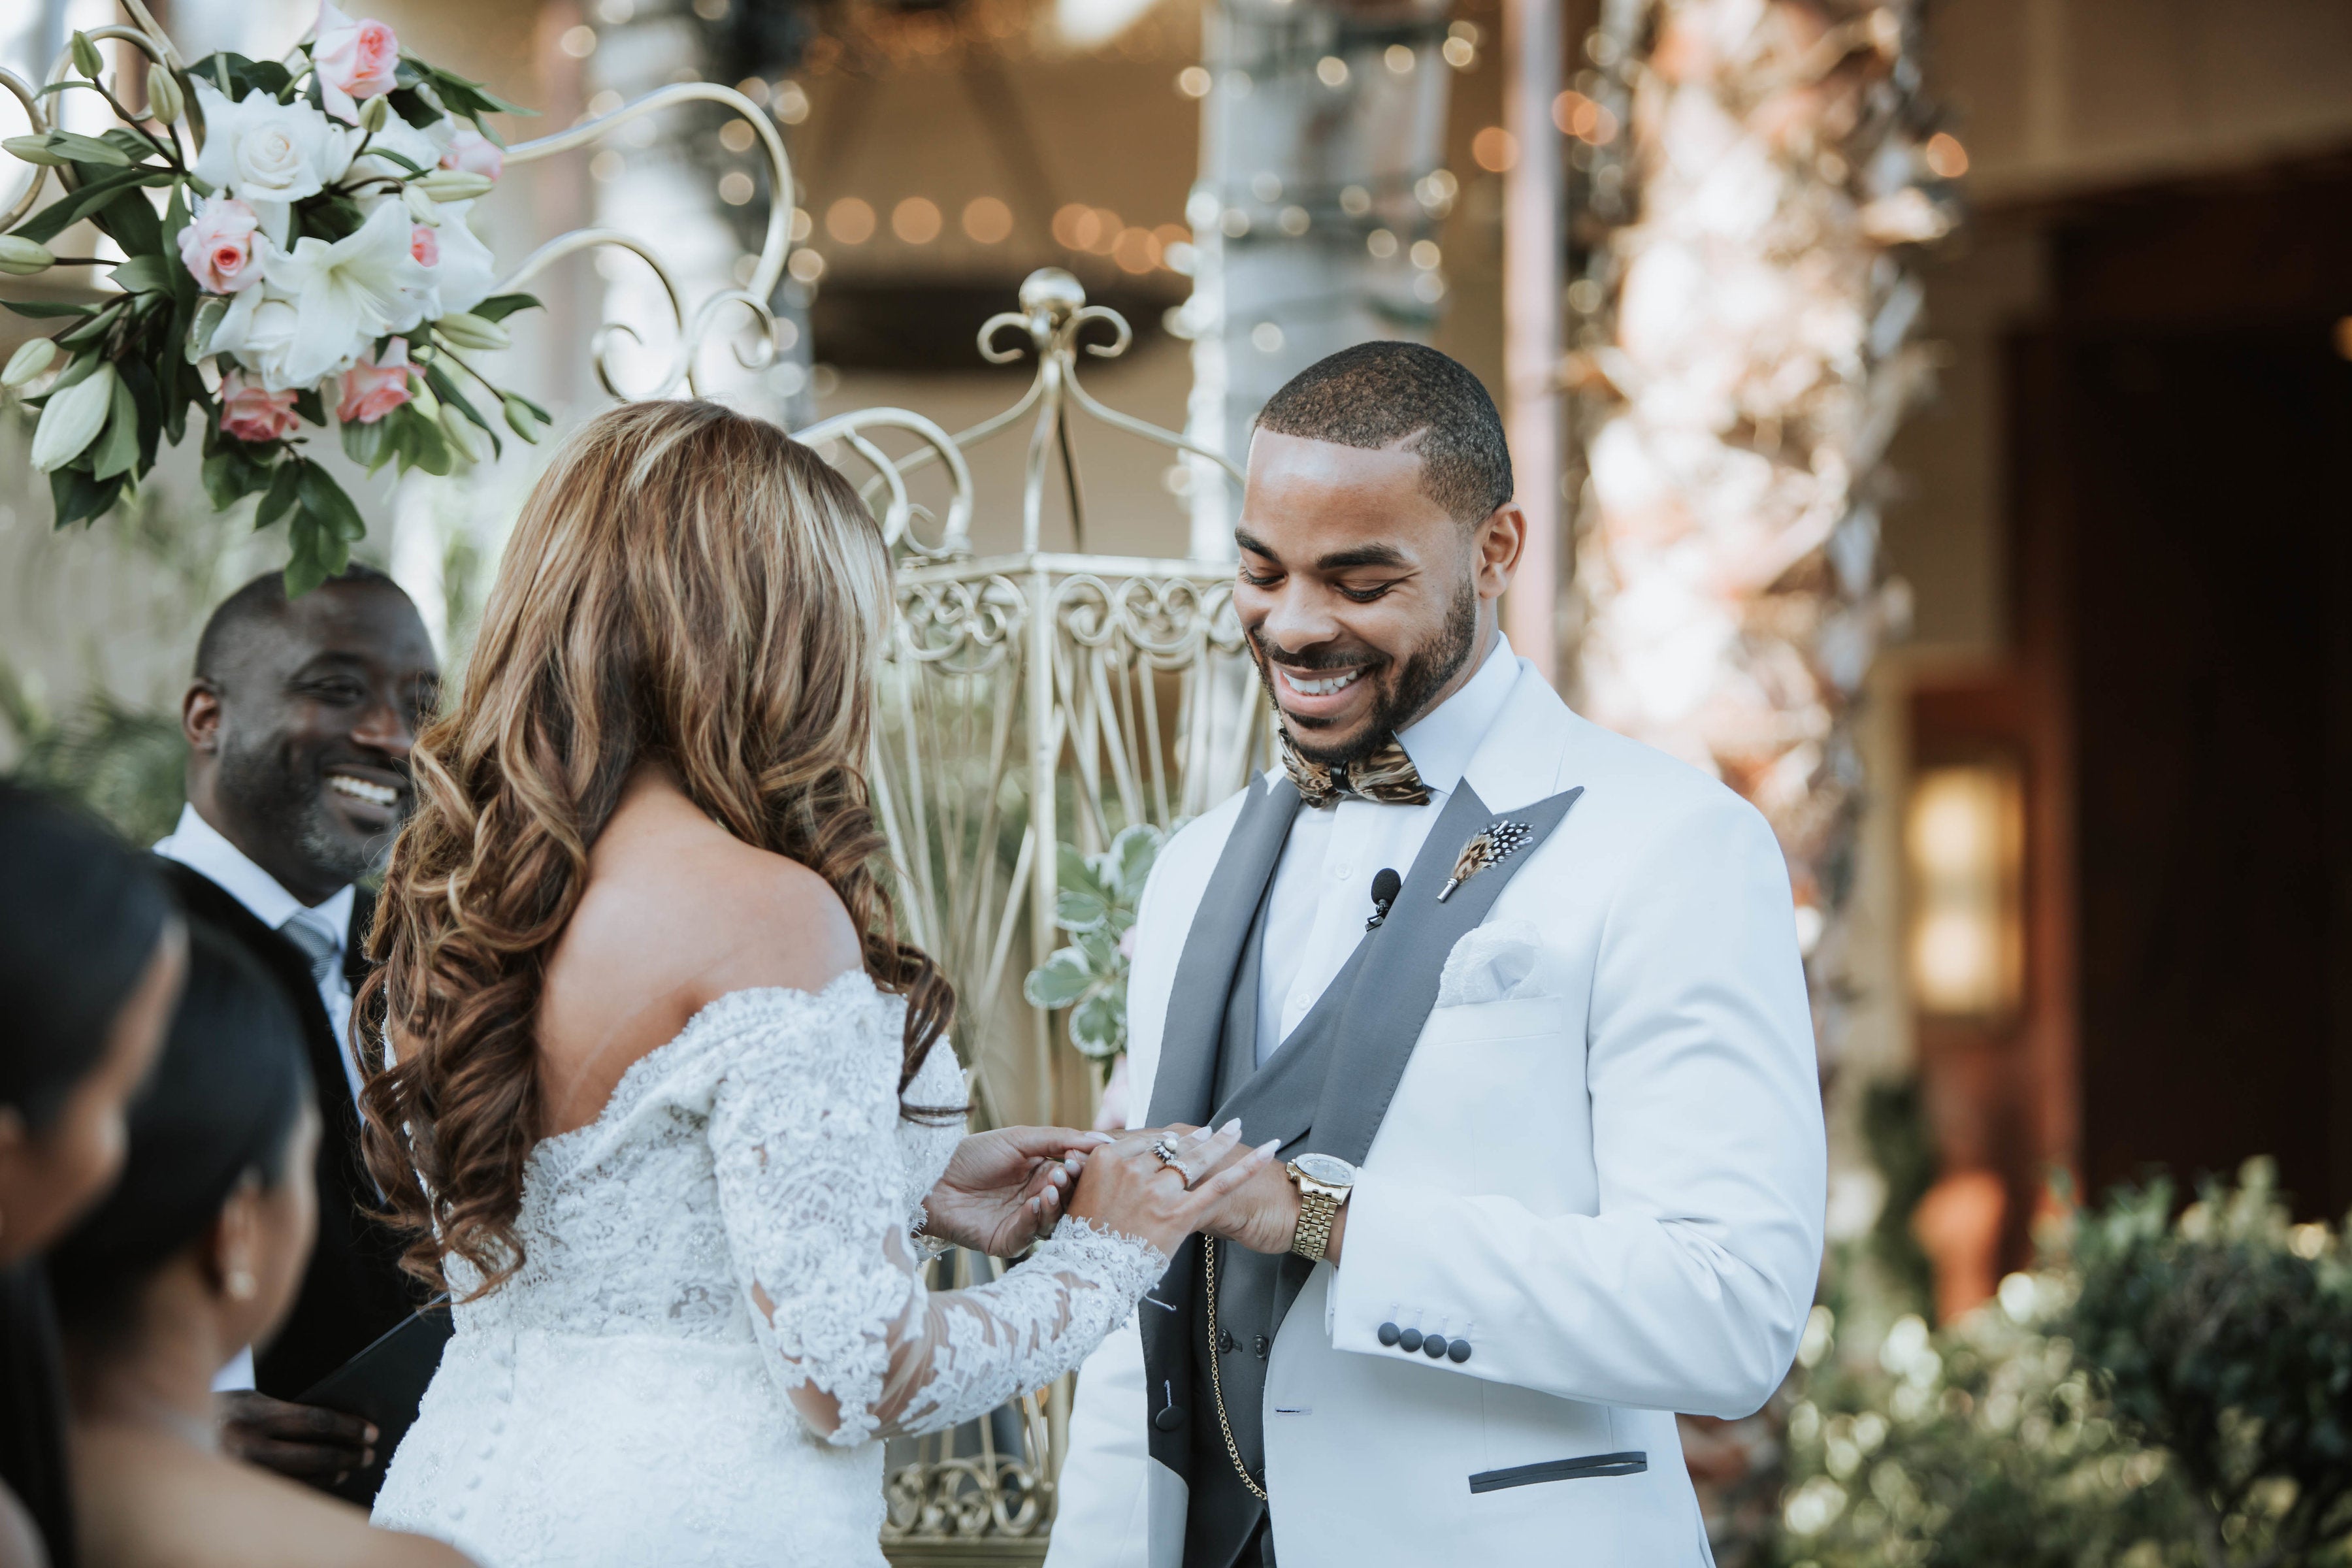 Bridal Bliss: We're Smitten With College Sweethearts Mikáel and Angel's Sweet Love Story
